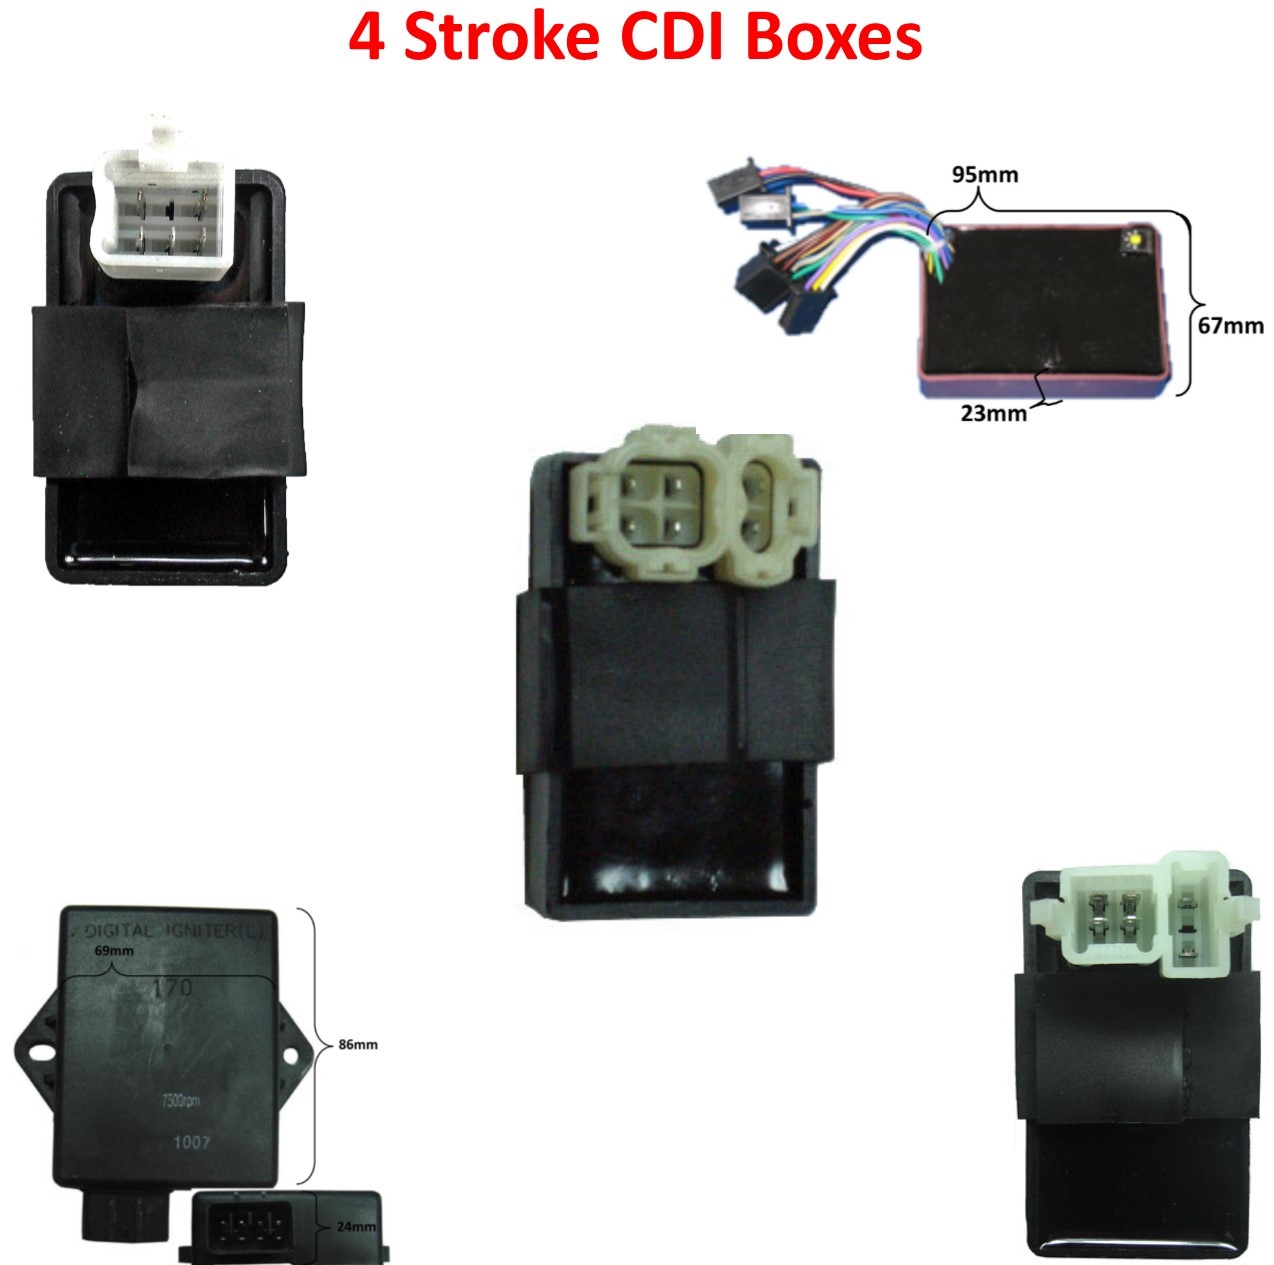 4 Stroke CDI's and Light Boxes